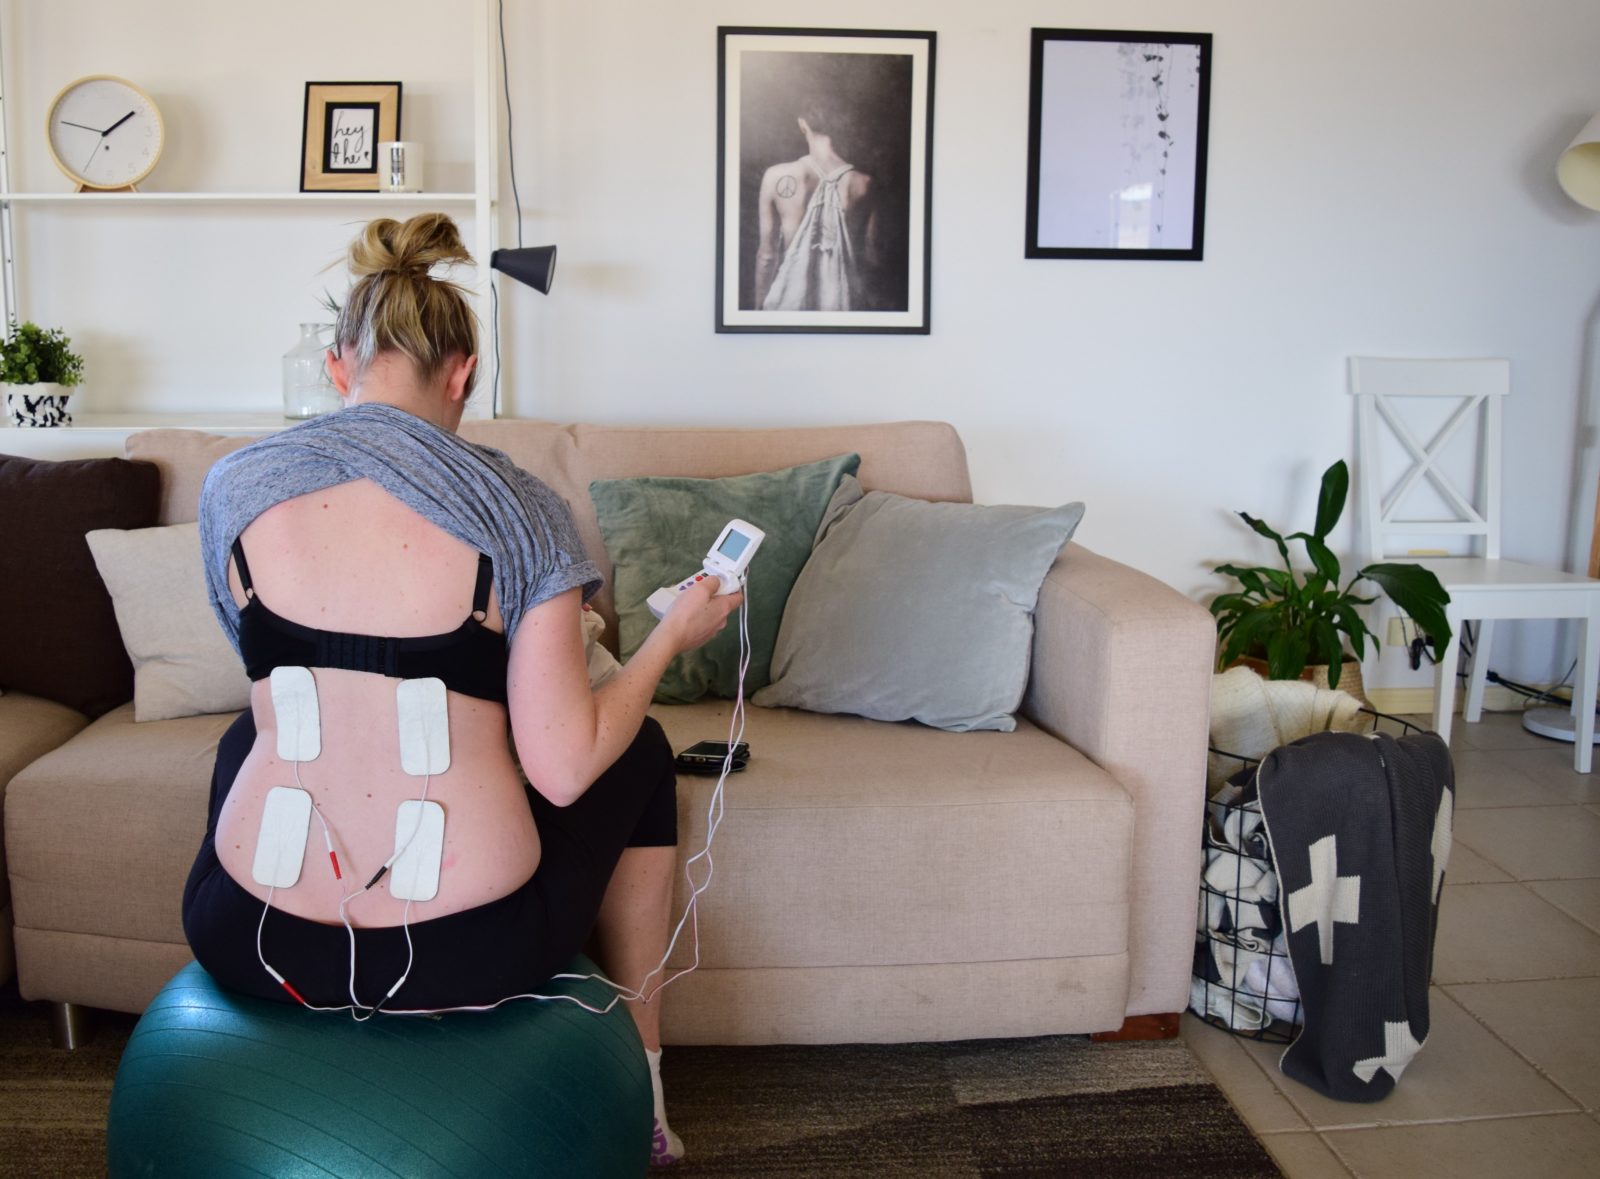 Using a TENS Machine for Labor Pain: Is It For You?